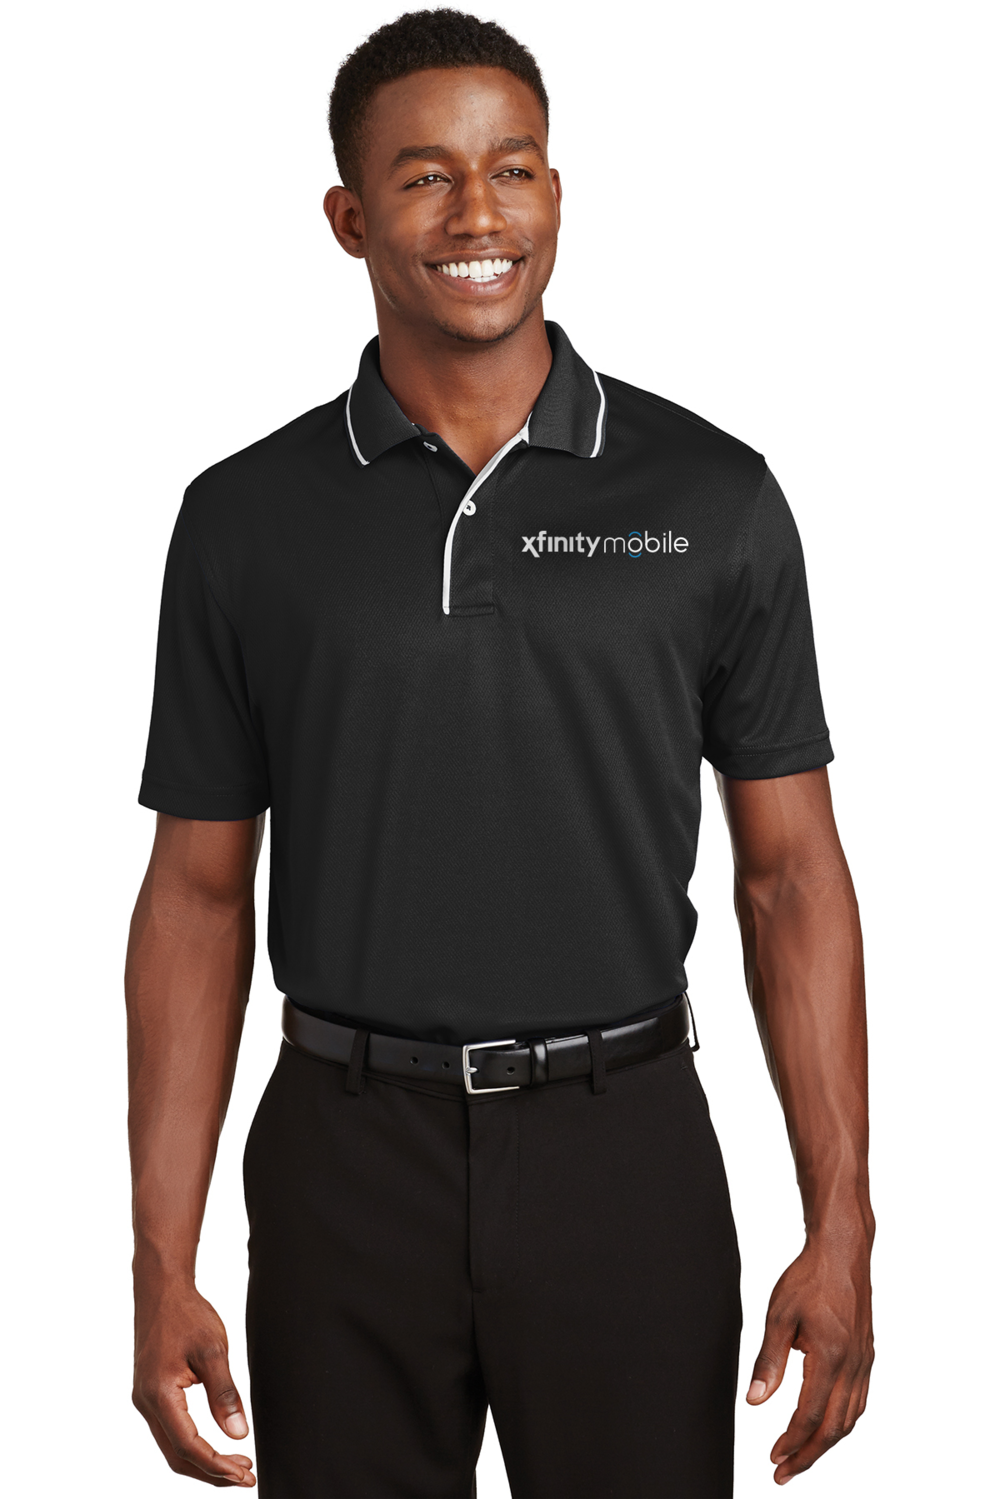 Sport-Tek® Dri-Mesh® Polo with Tipped Collar and Piping — All C's Promotions